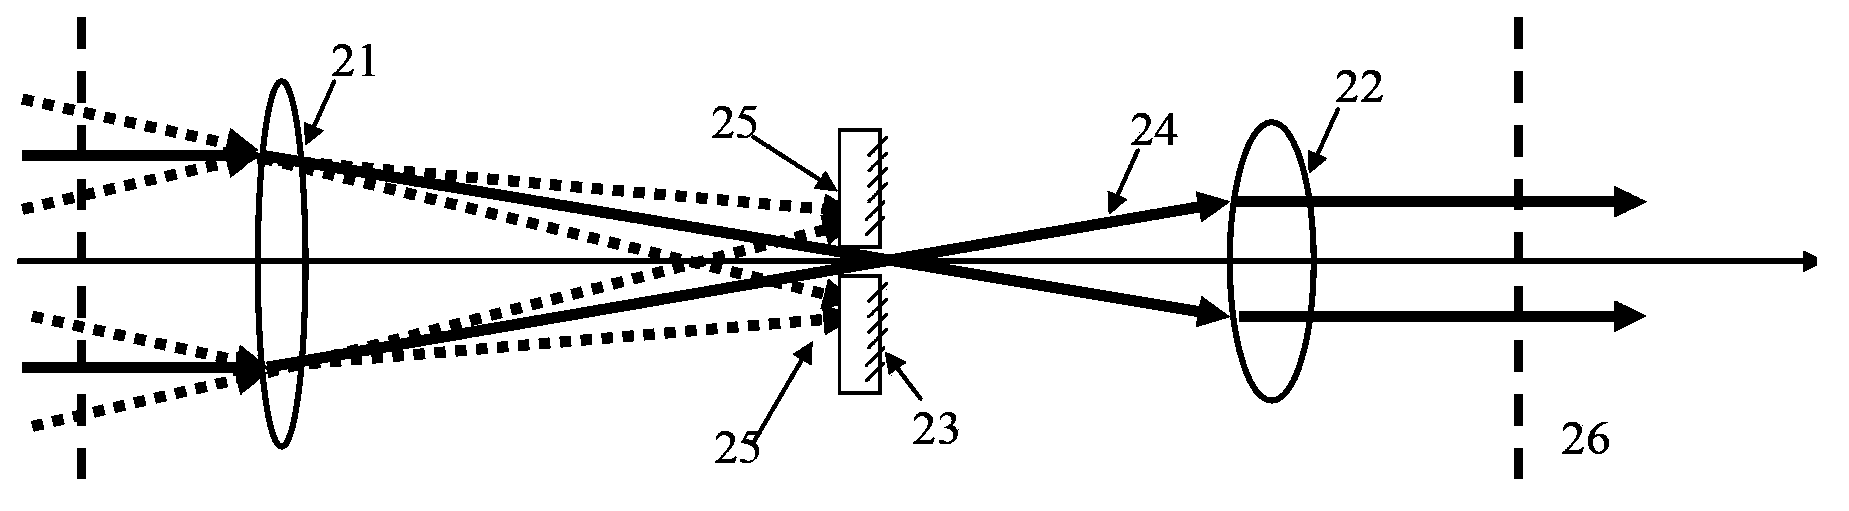 High-power laser image transfer space filtering device